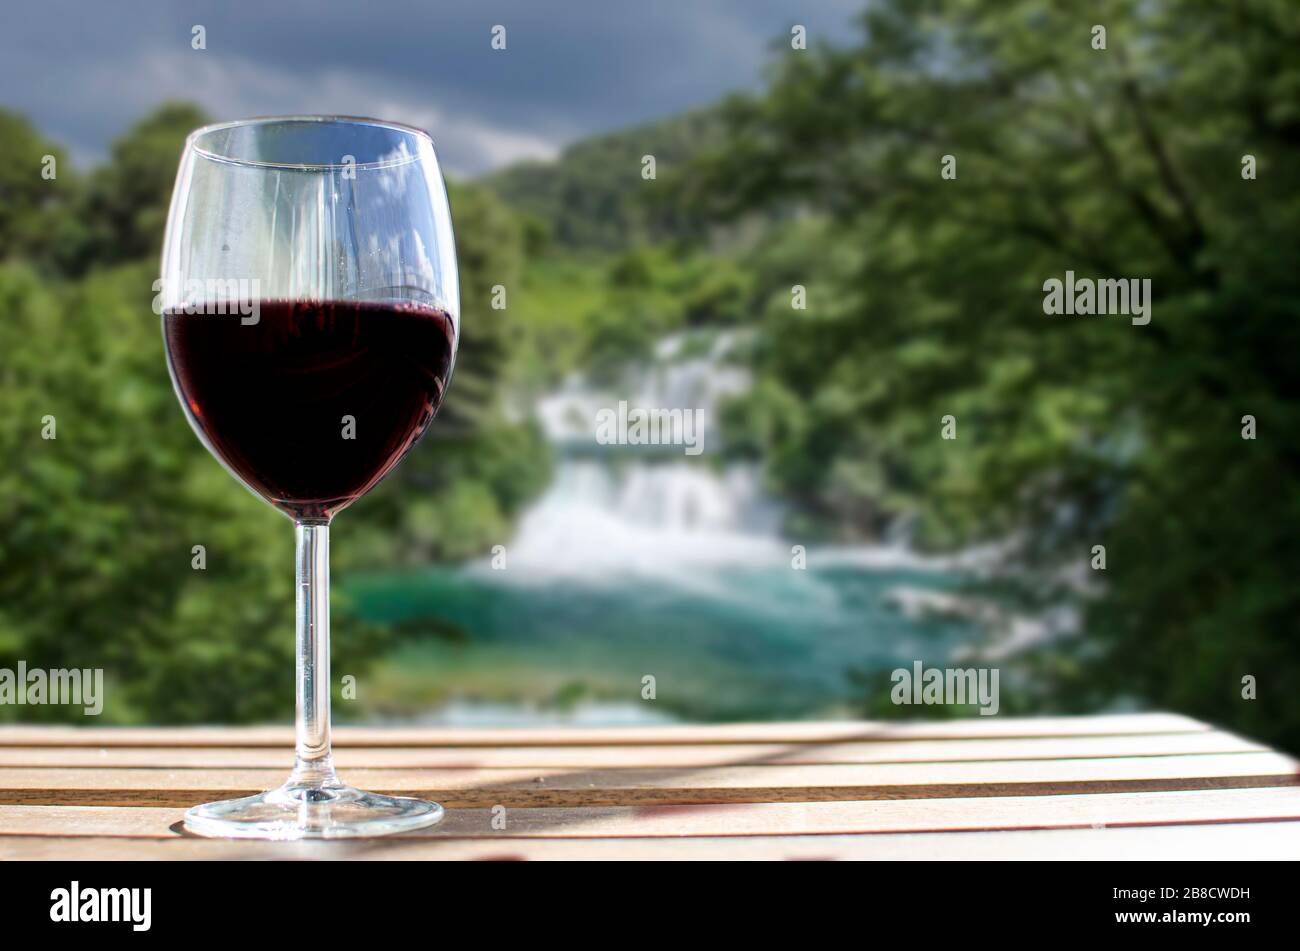 Glass of wine on wooden table with big waterfall blur background in Croatia. Sunny view of glass of red wine overlooking park, Croatia Stock Photo